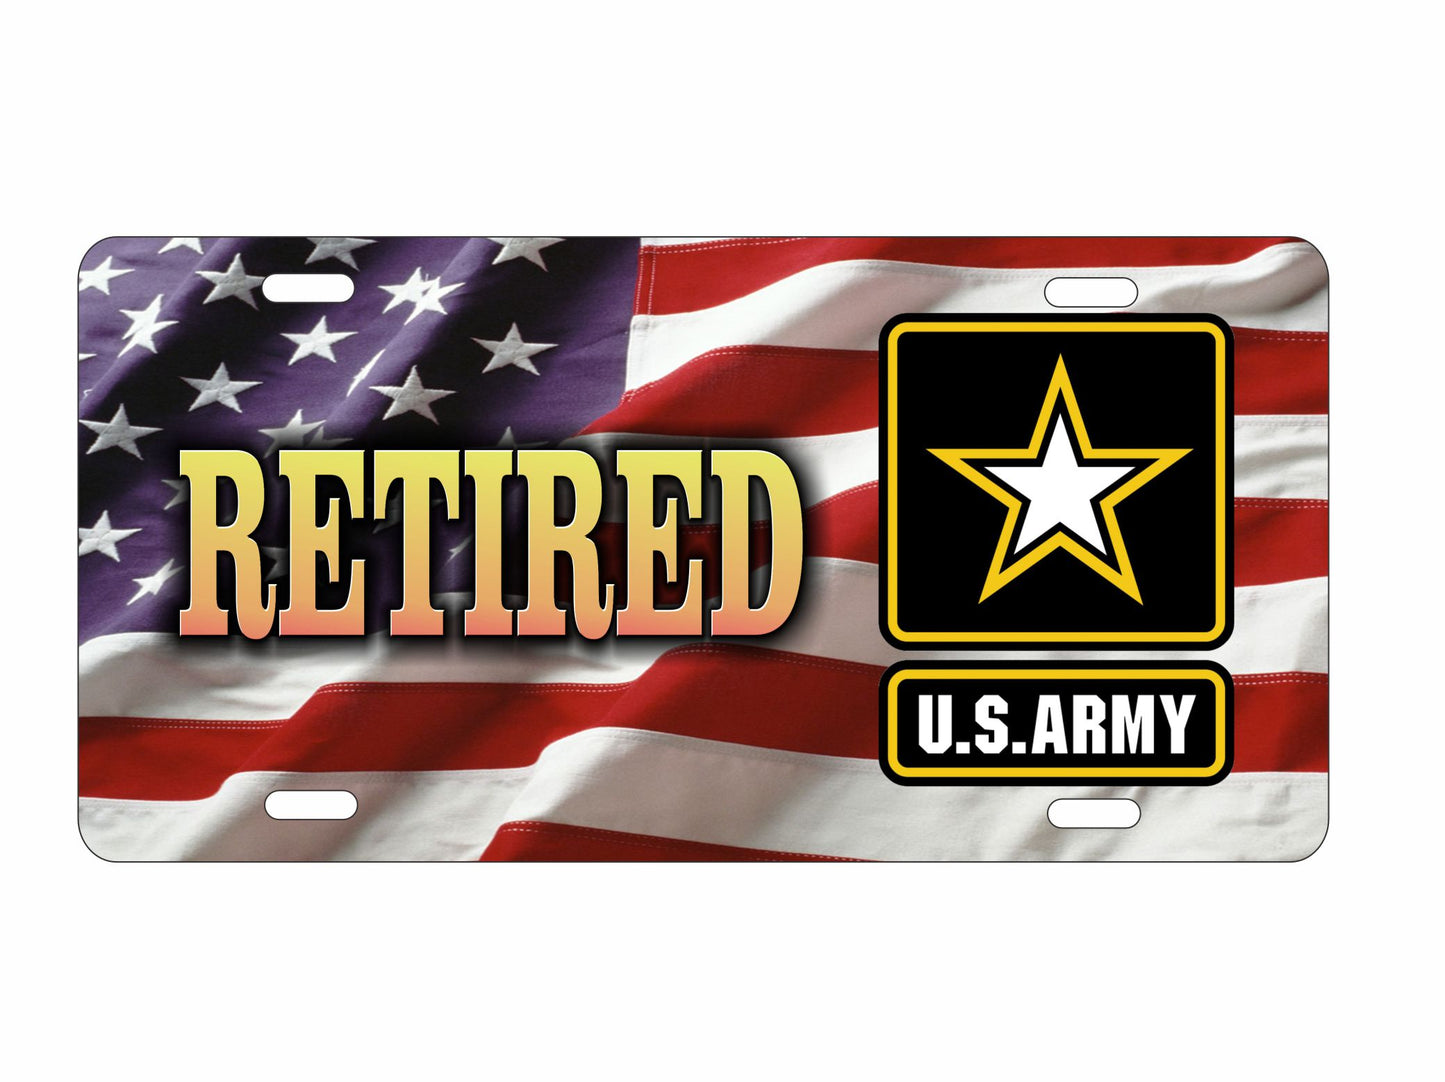 Retired US army novelty Front license plate Decorative Military vanity aluminum car tag